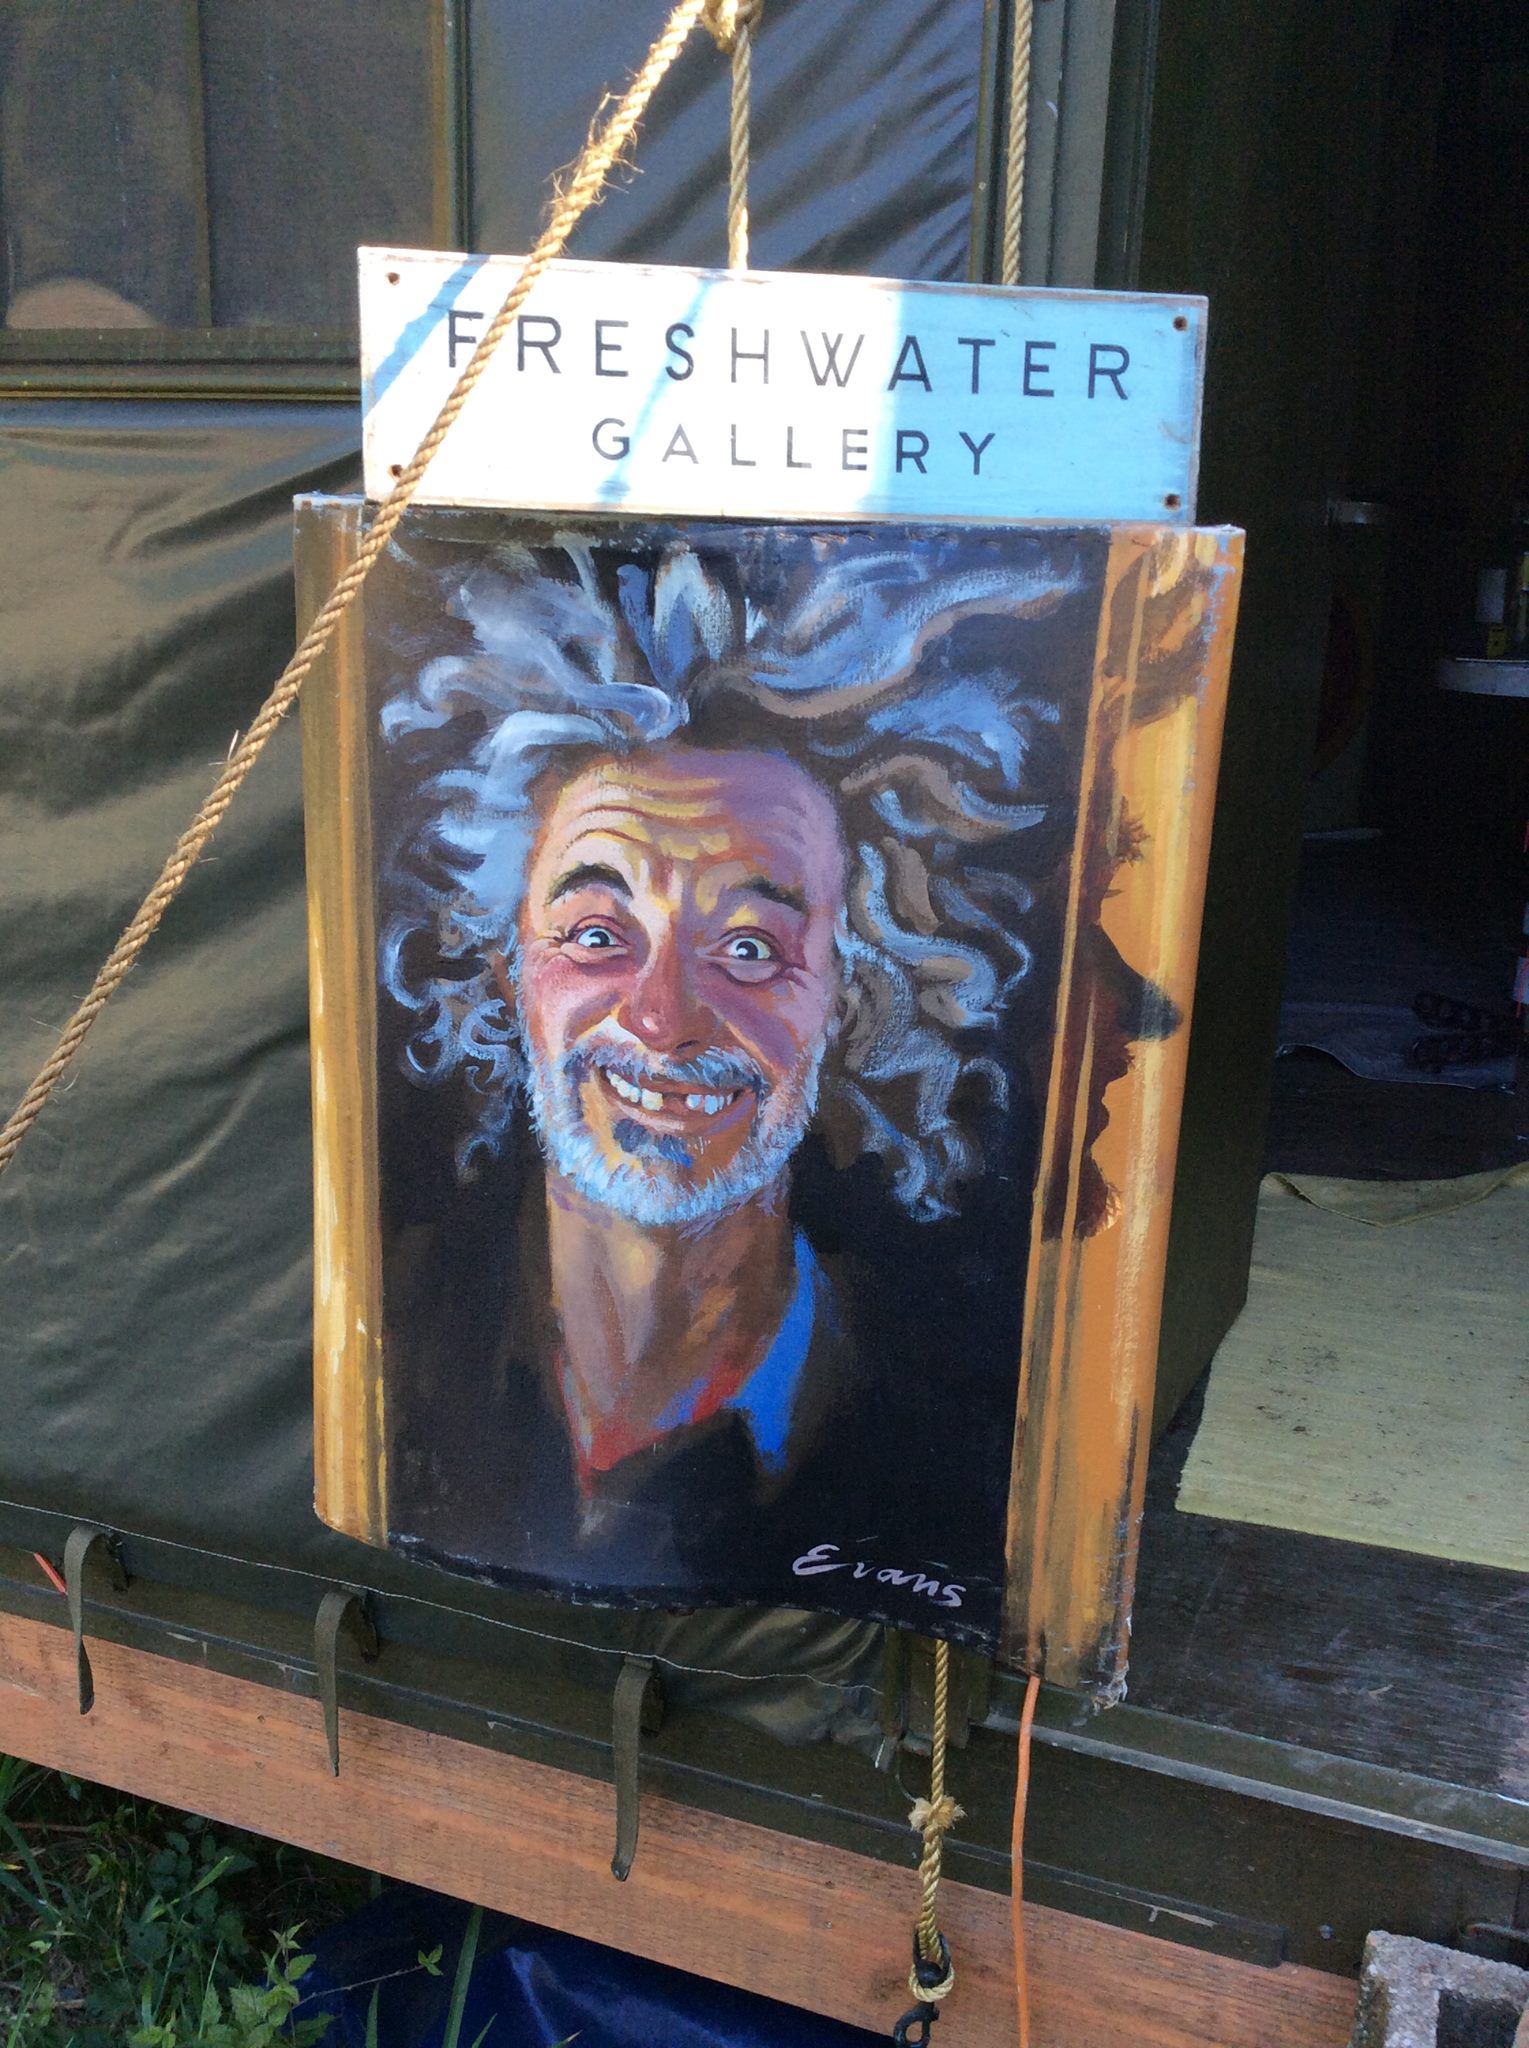 Freshwater Gallery Signage and Self Portrait